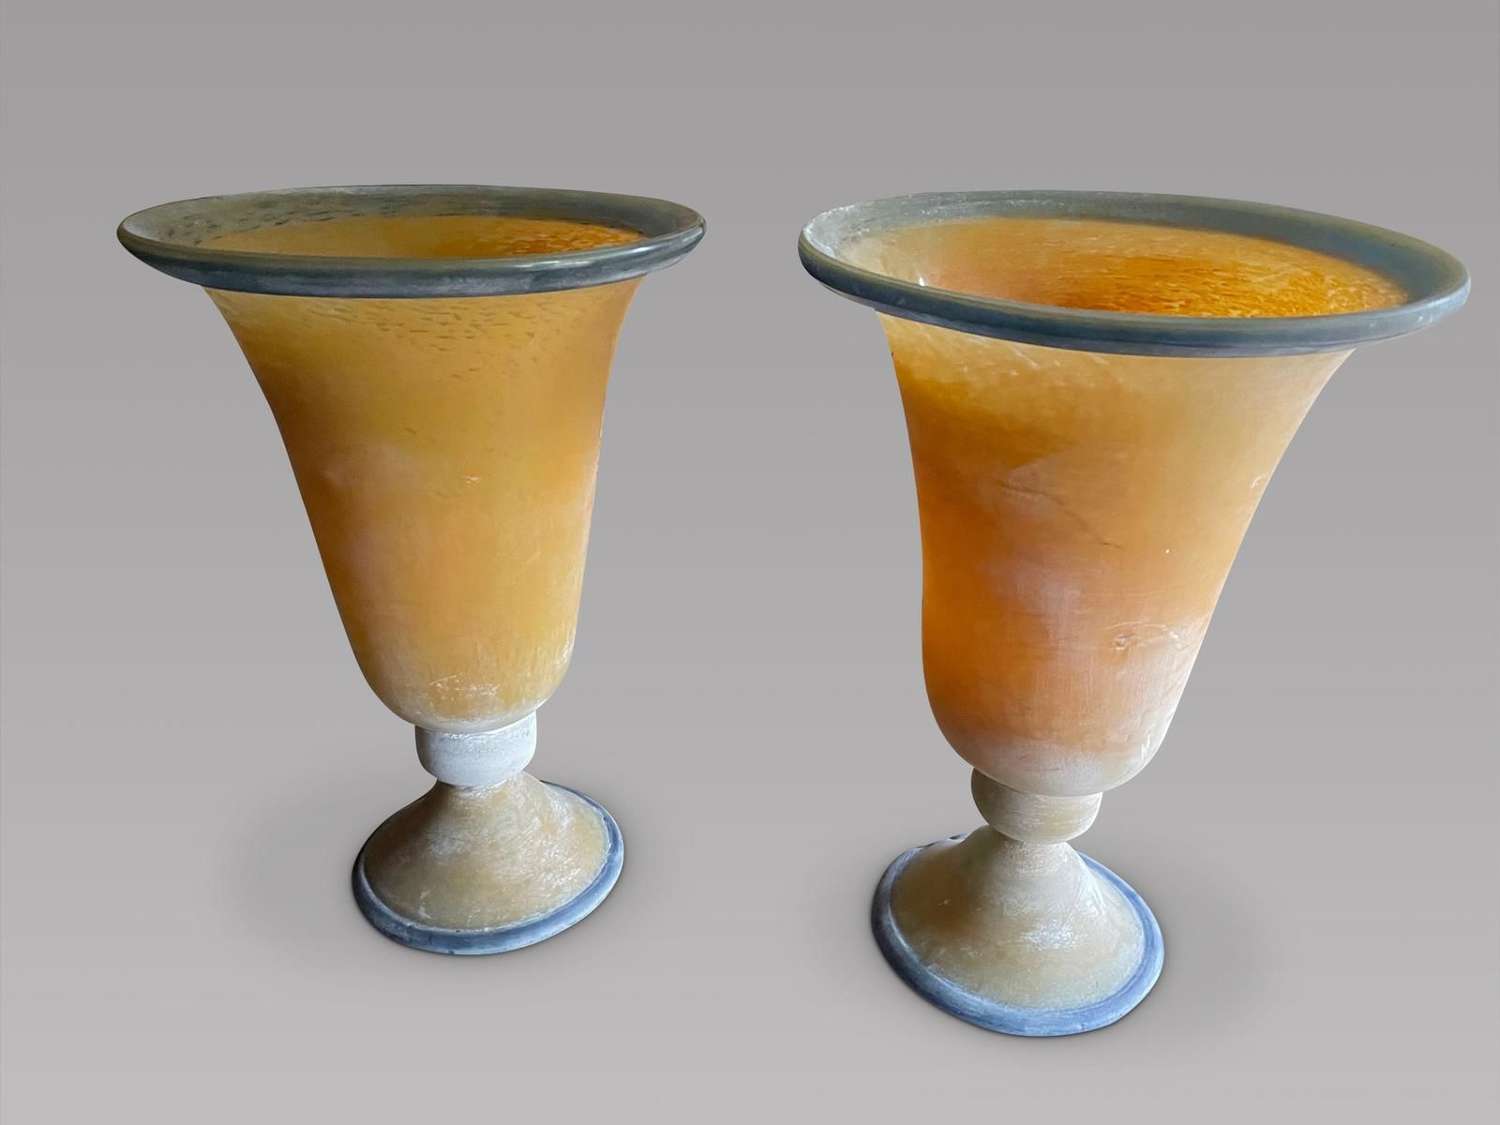 Pair of Attractive Opaque Amber and Blue Glass Table Uplighters